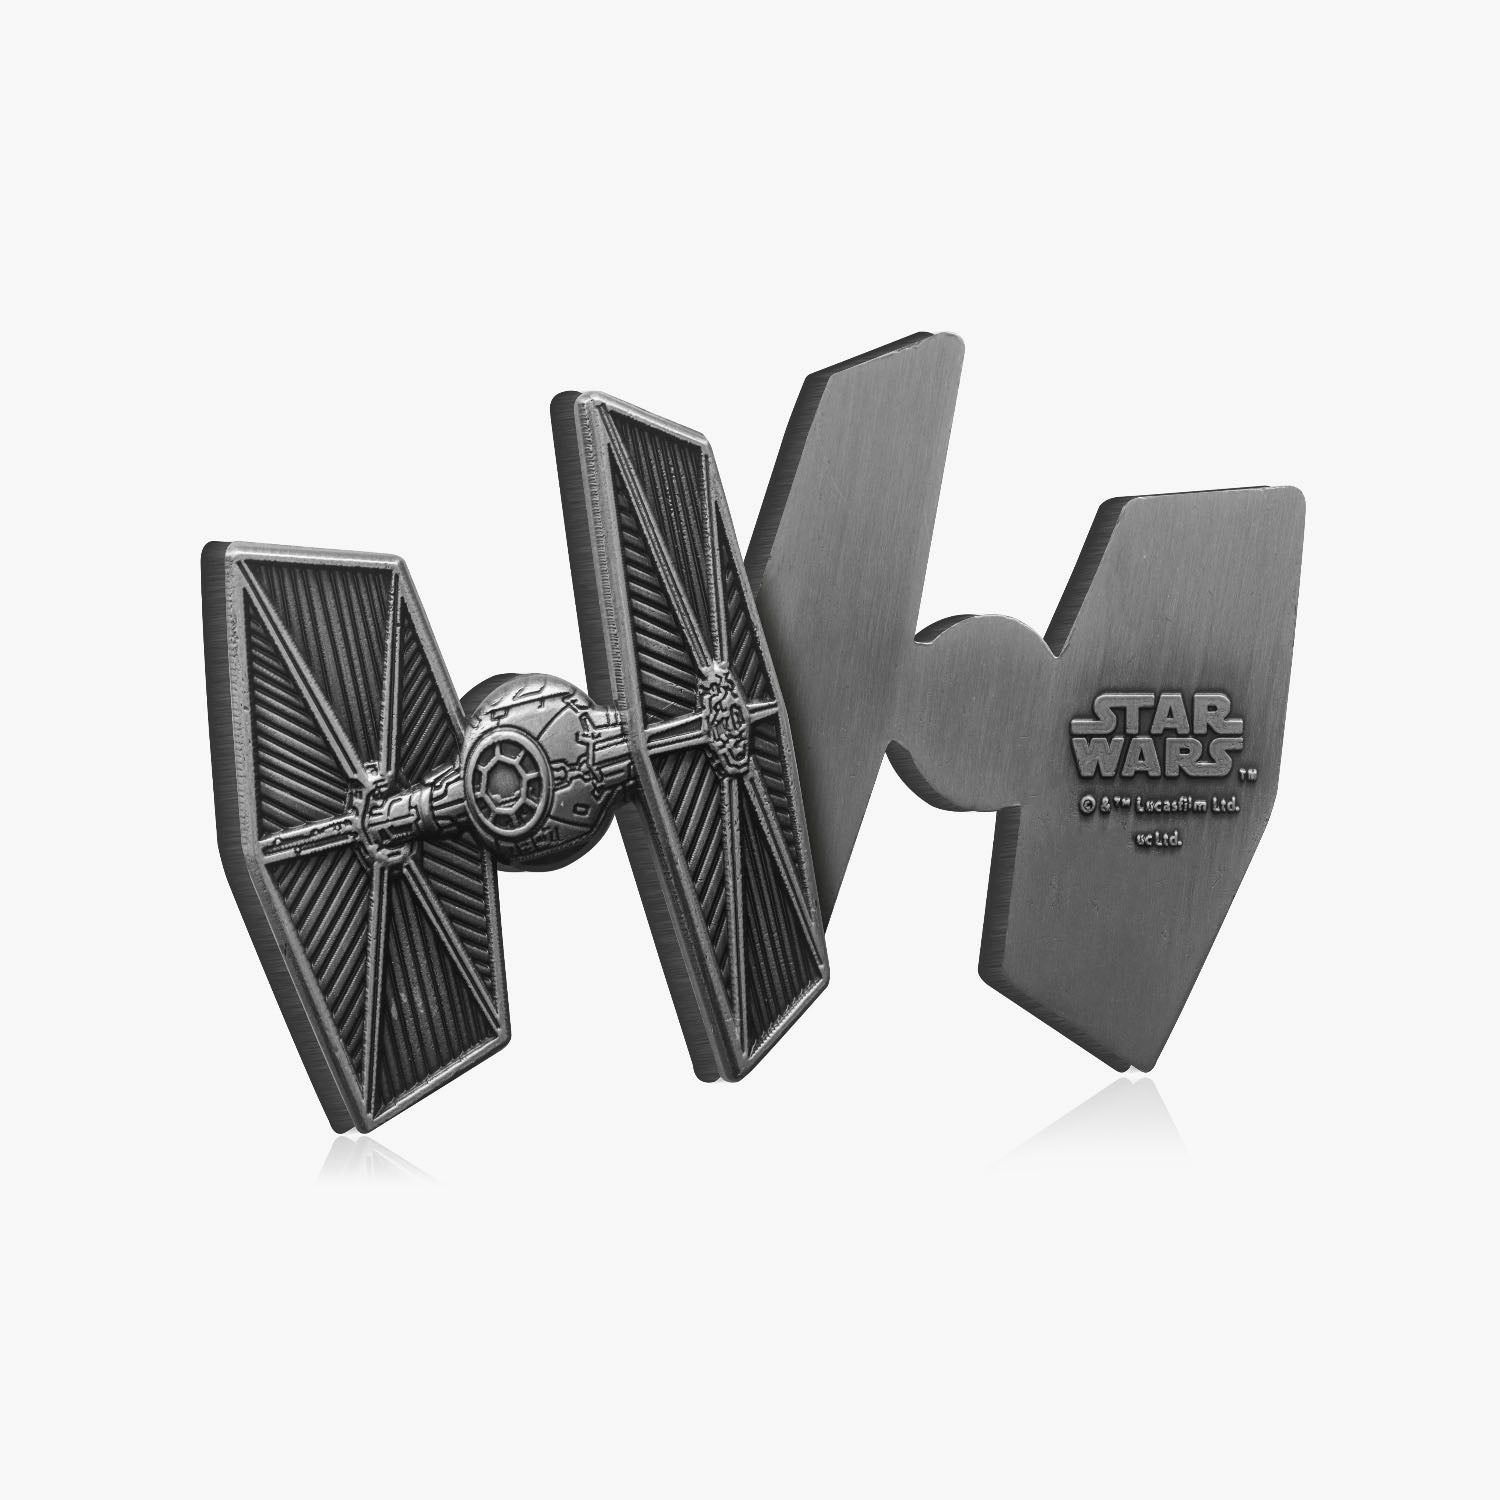 Official Star Wars TIE Fighter Shaped Commemorative